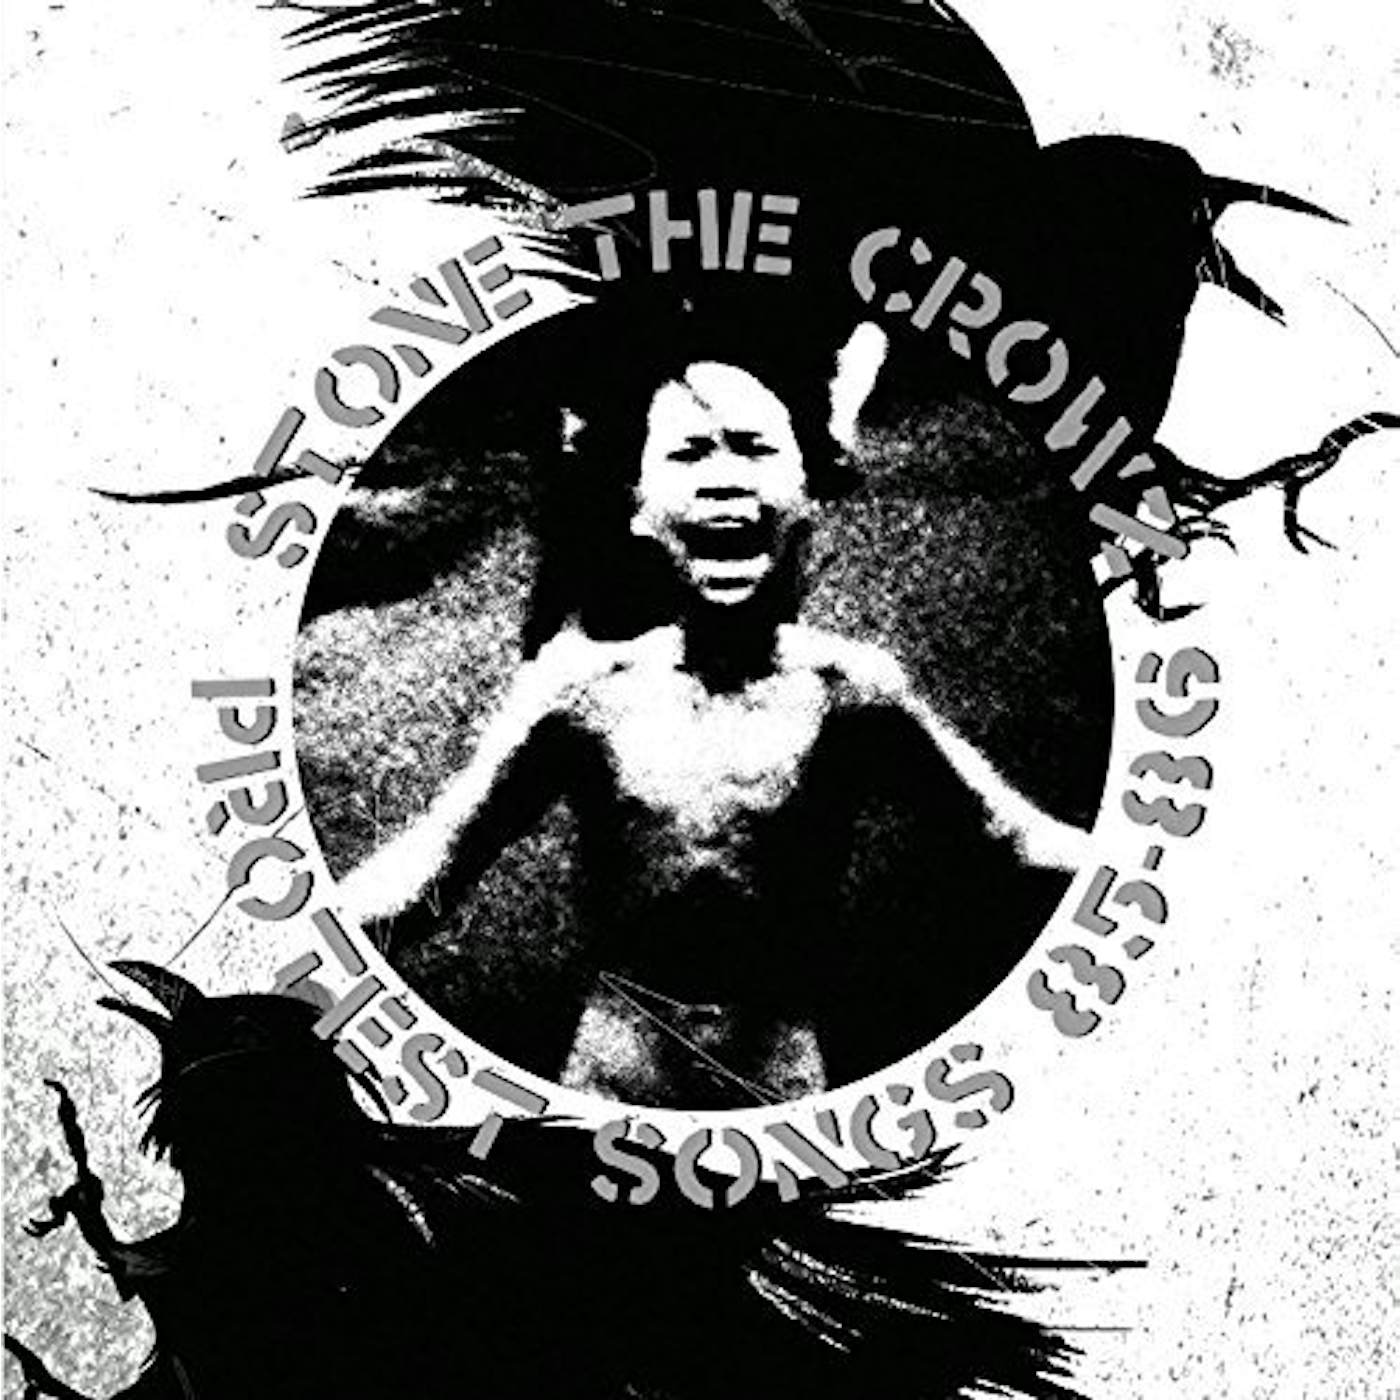 Stone The Crowz PROTEST SONGS 85 - 86 CD